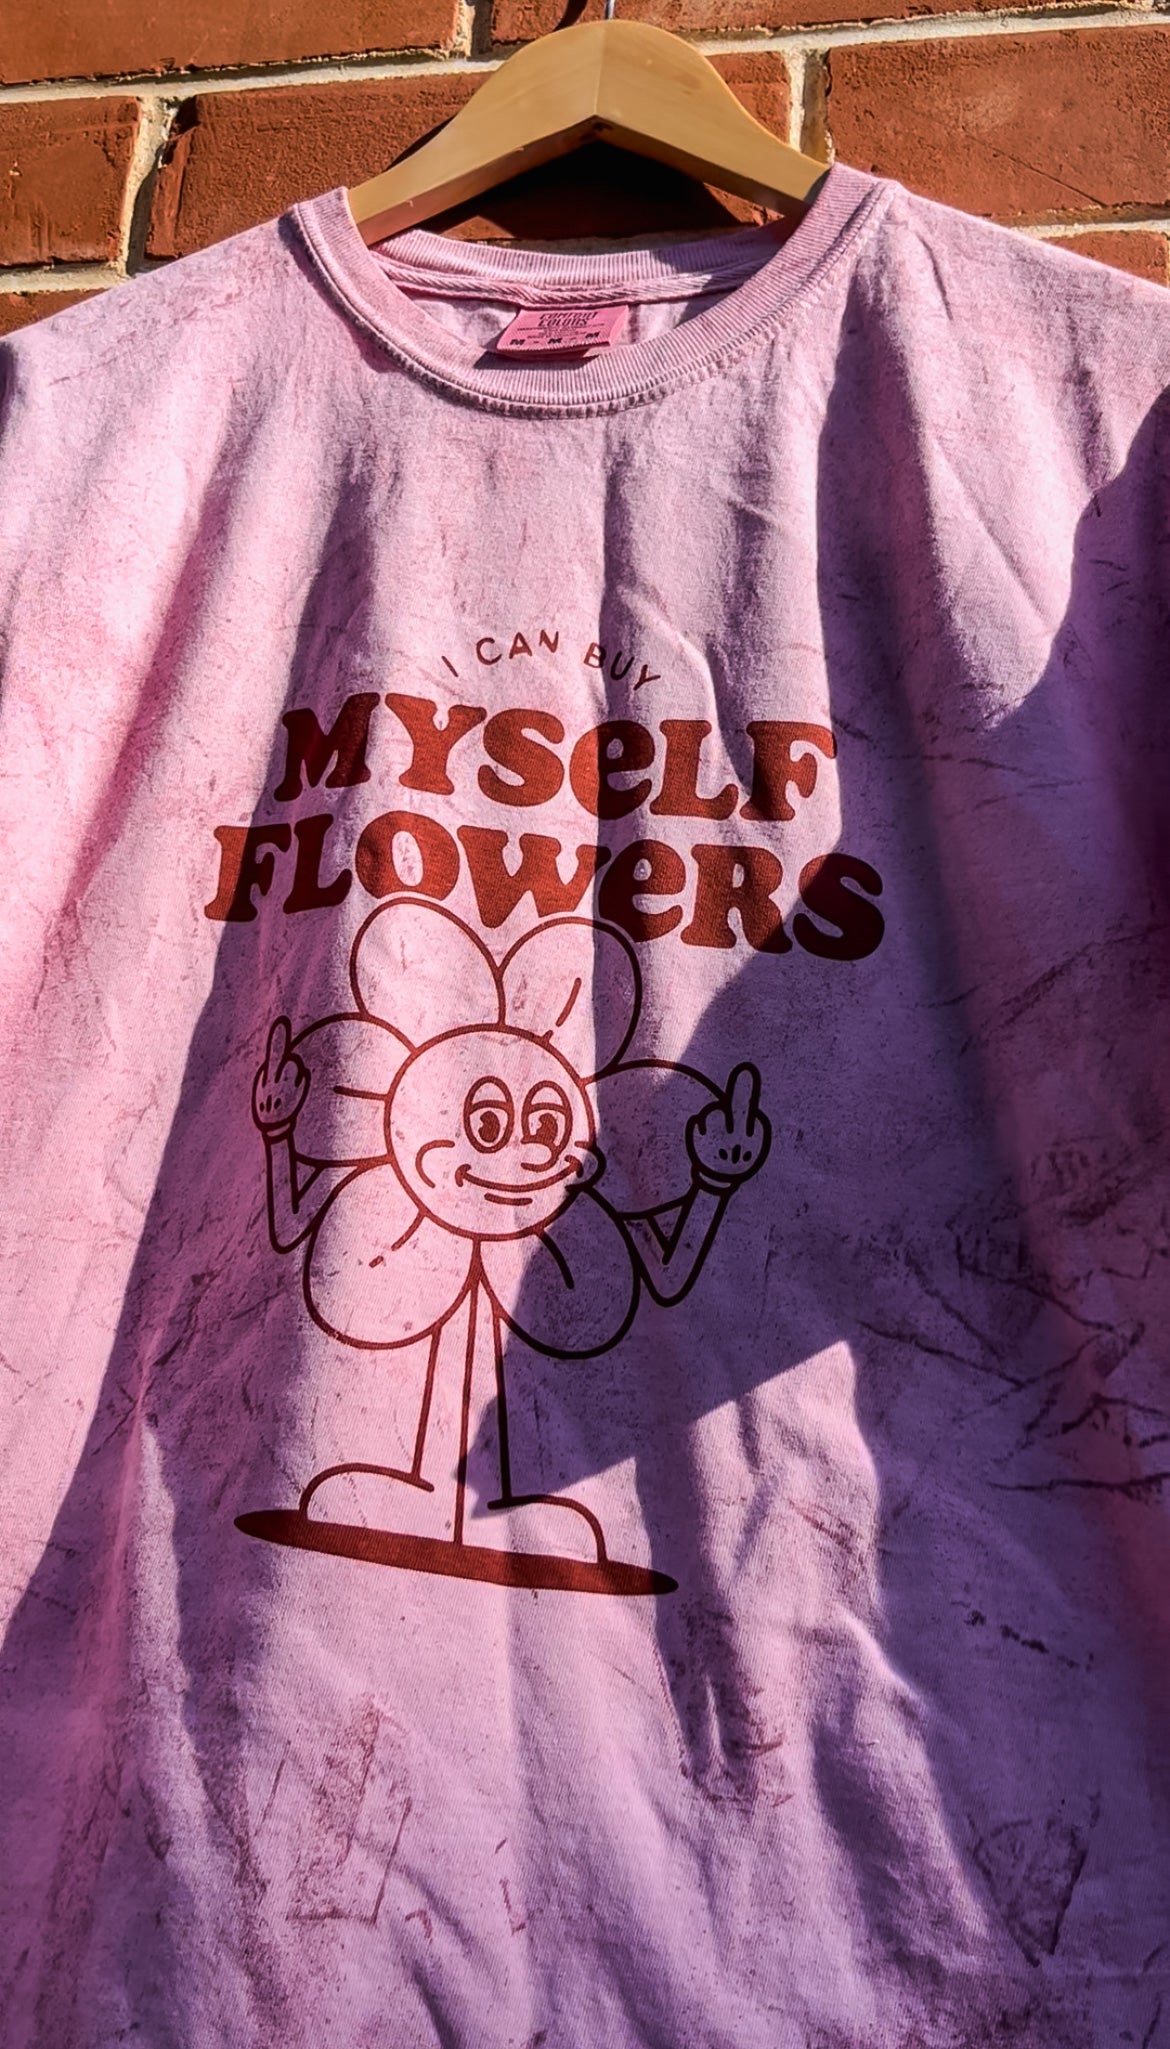 I Can Buy Myself Flowers T-shirt